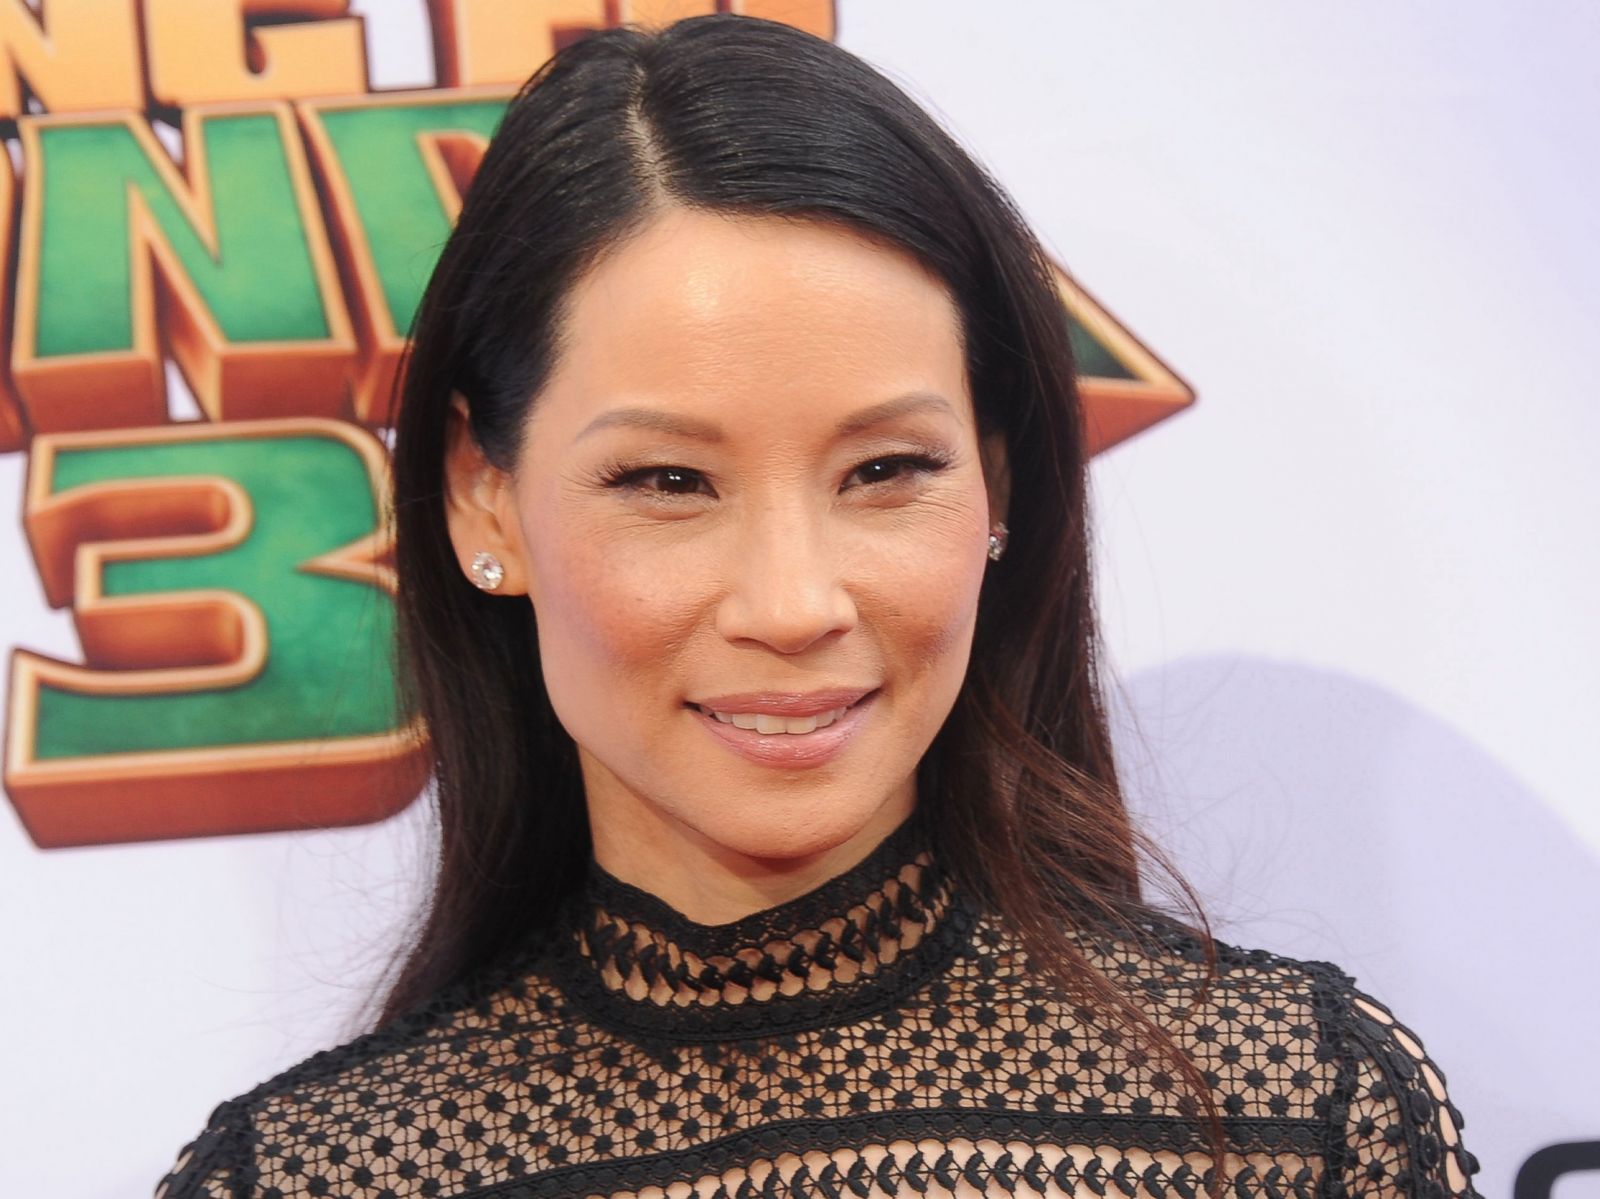 Lucy Liu Talks 'Elementary,' Motherhood and Her Earliest Acting Roles on 'Real Biz With Rebecca Jarvis'